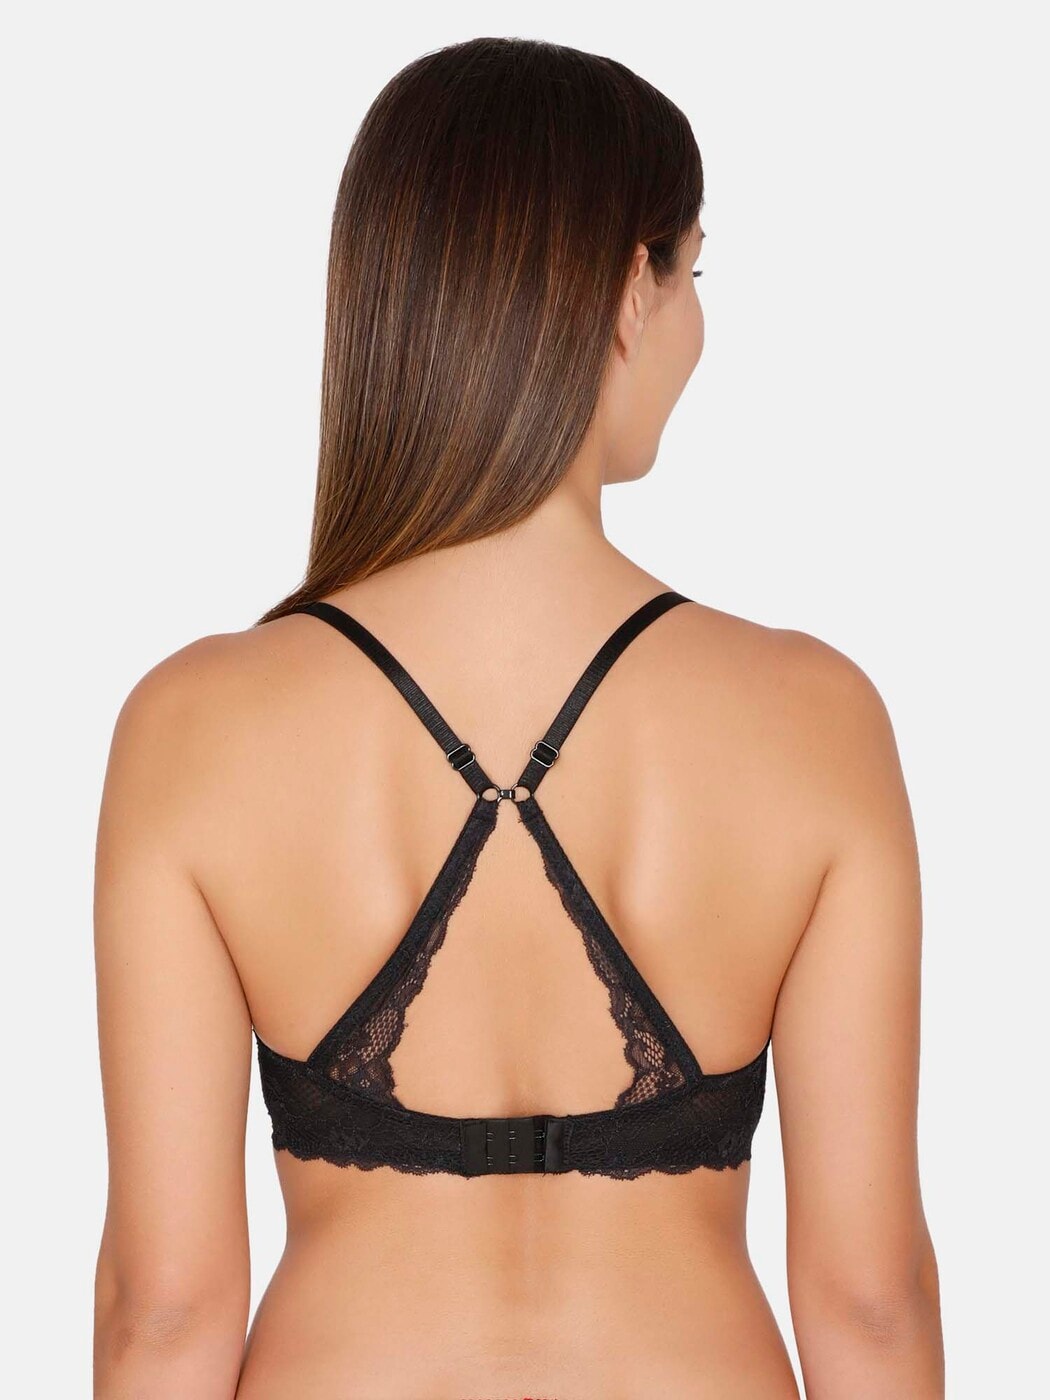 Van Heusen Intimates Bras, Women Anti Bacterial Padded Breathable Bra - No Slip  Strap And Flexi Wires for Women at Vanheuseninti